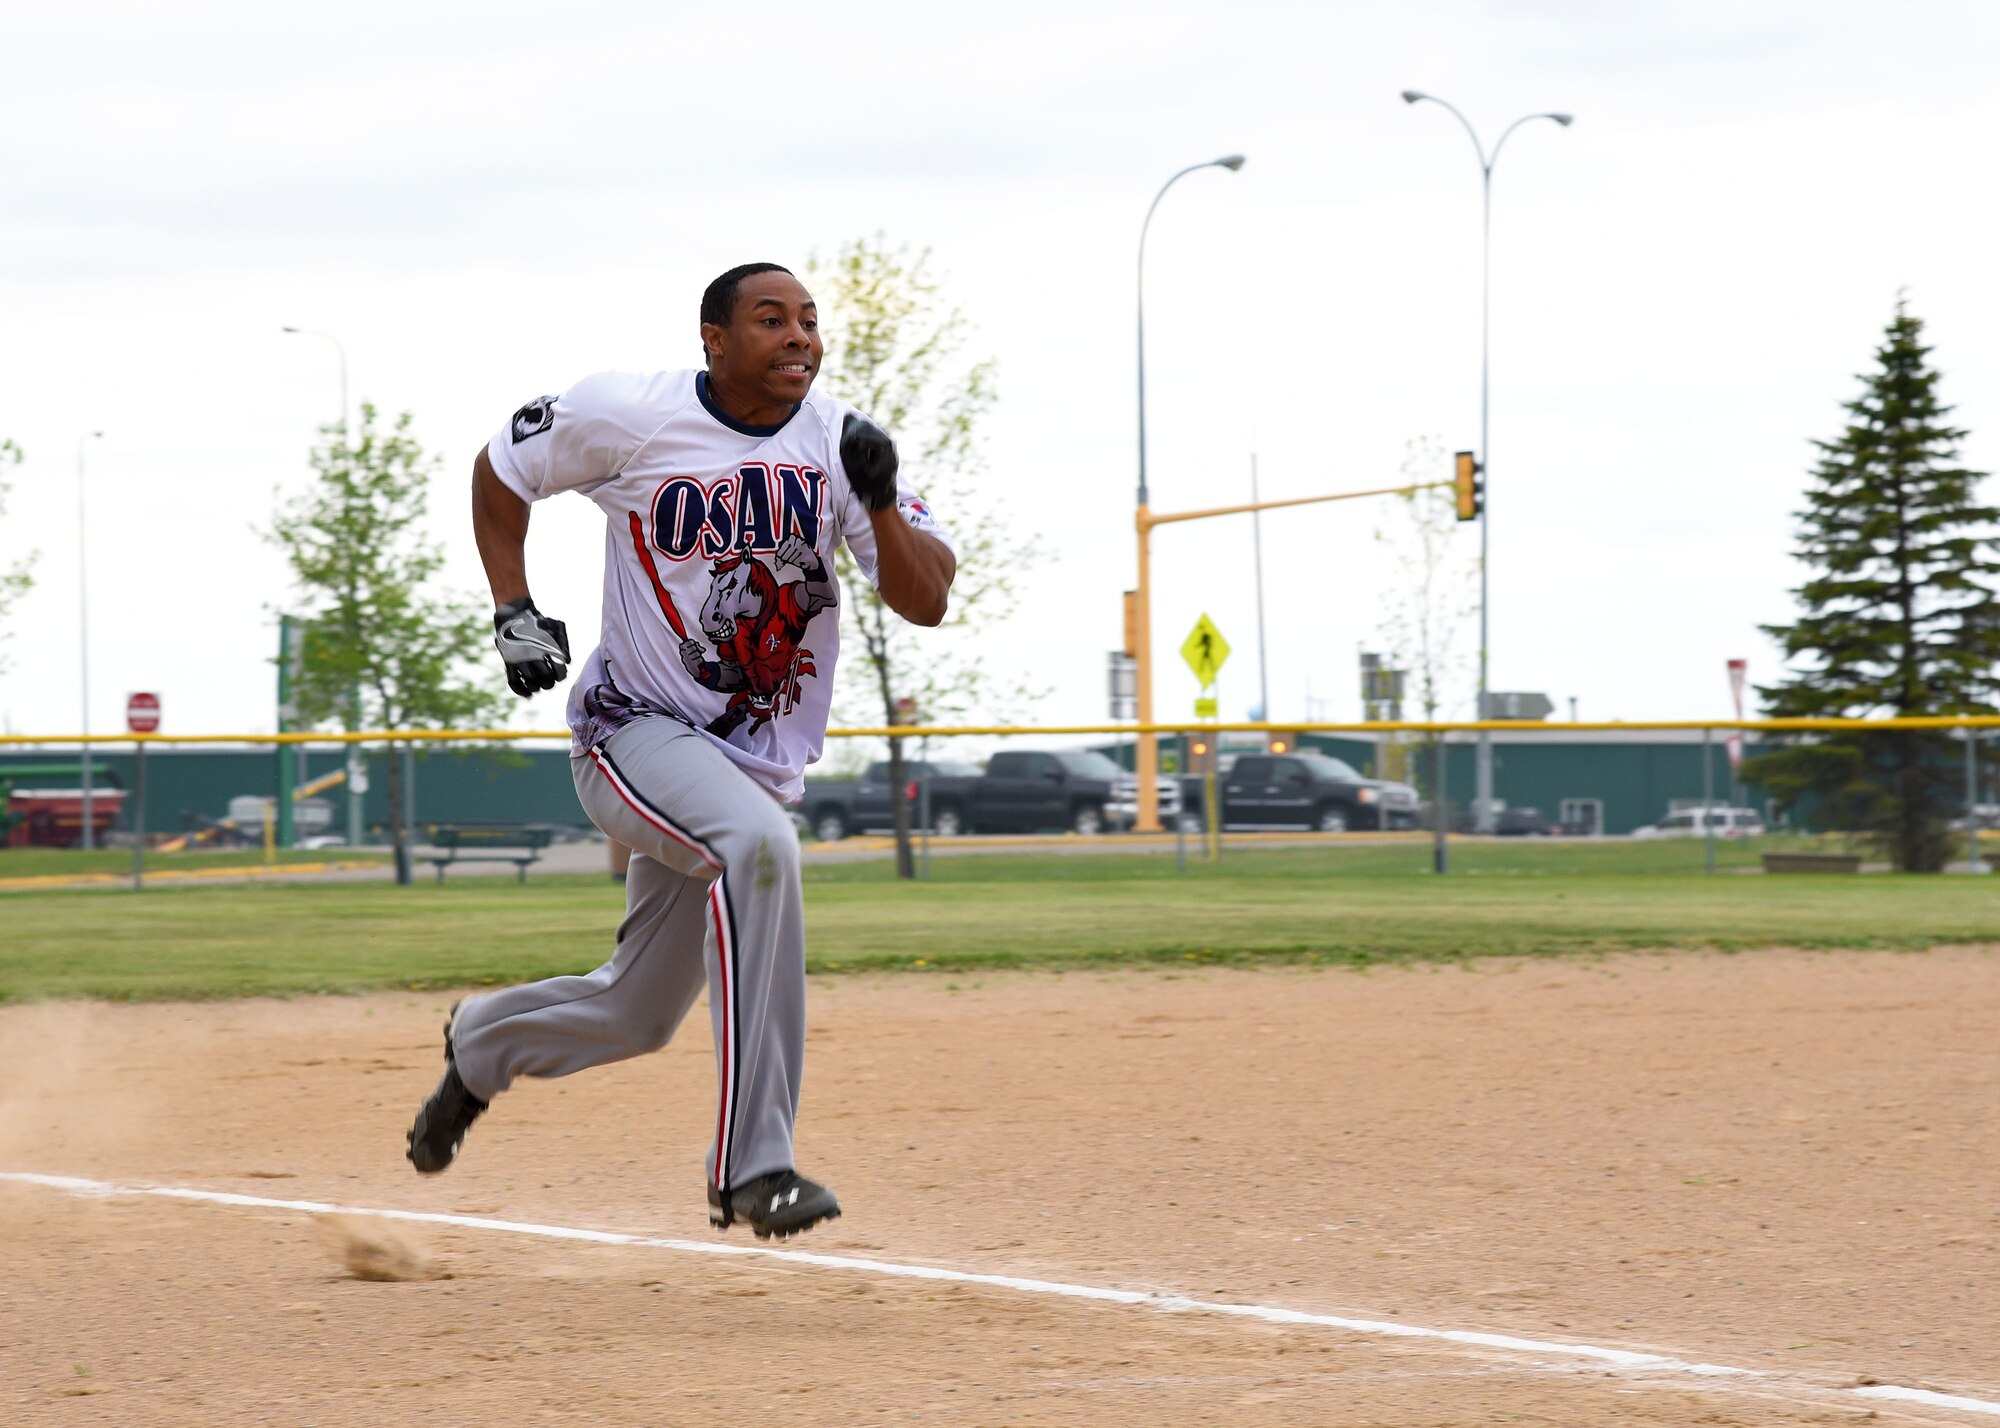 A Grand Forks AFB Airman sprints to the home plate during a play in the Grand Forks AFB versus Minot AFB annual softball tournament at Devil’s Lake, N.D., May 25, 2017. The tournament is an annual tradition between the two installations, to improve morale and allow both bases to have fun together. (U.S. Air Force photo by Airman First Class Elora McCutcheon)